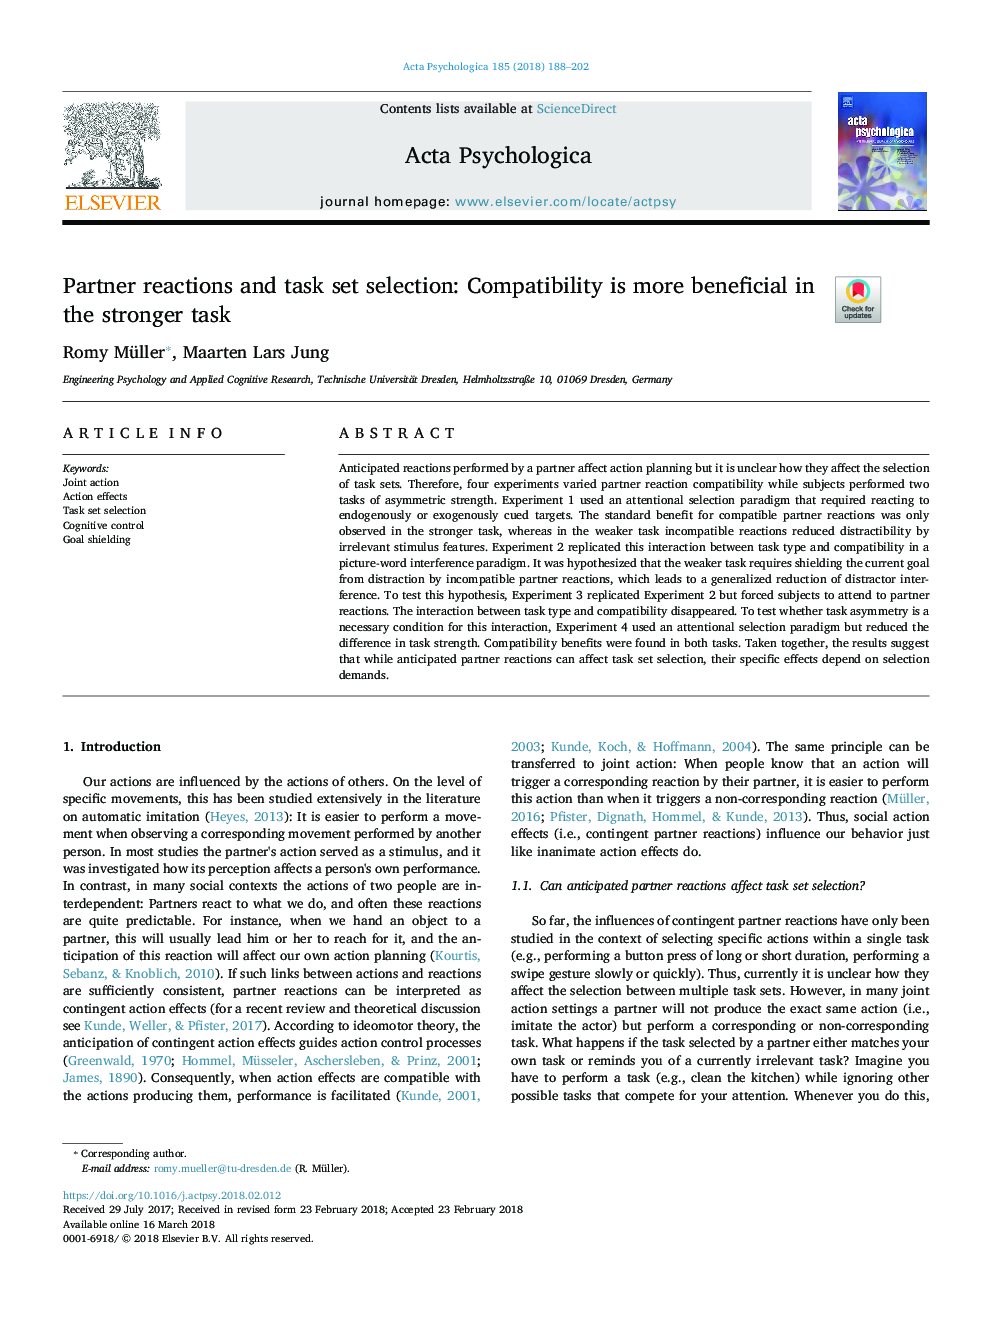 Partner reactions and task set selection: Compatibility is more beneficial in the stronger task